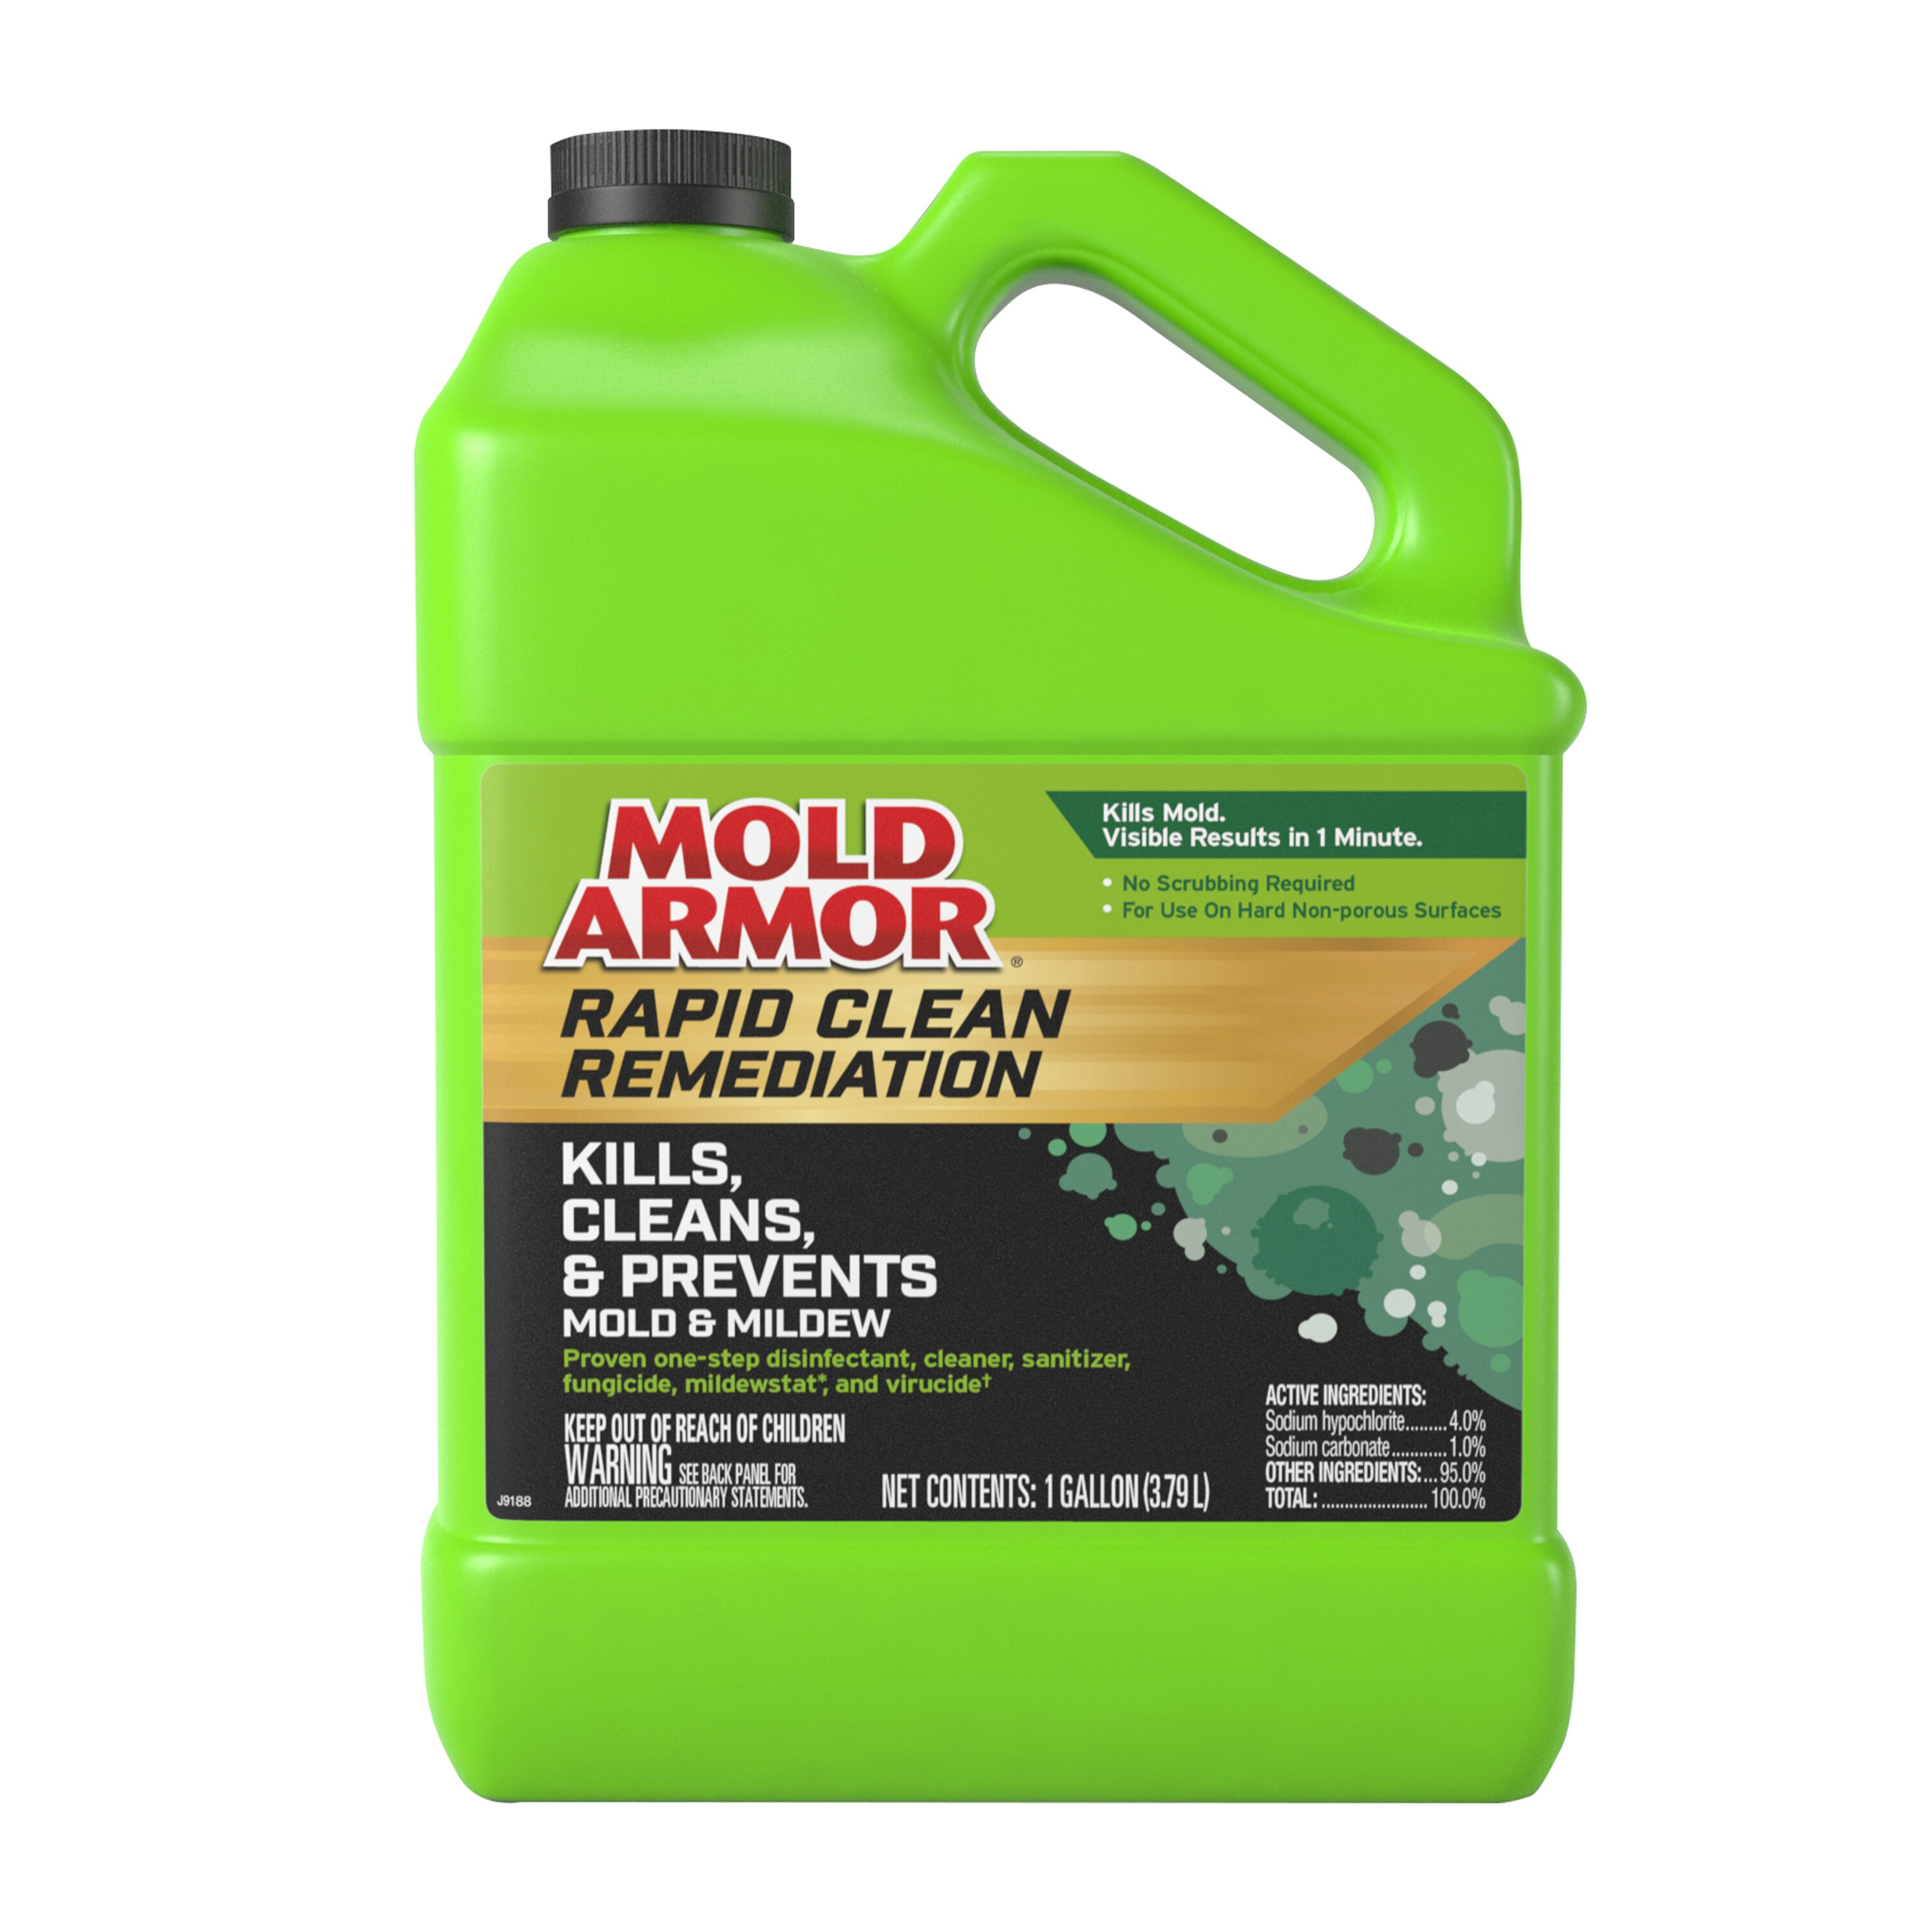 Mold Armor 128-fl oz Liquid Mold Remover - Kills, Cleans, and Prevents Mold  and Mildew - One-Step Remediation - Disinfects and Sanitizes Surfaces in  the Mold Removers department at